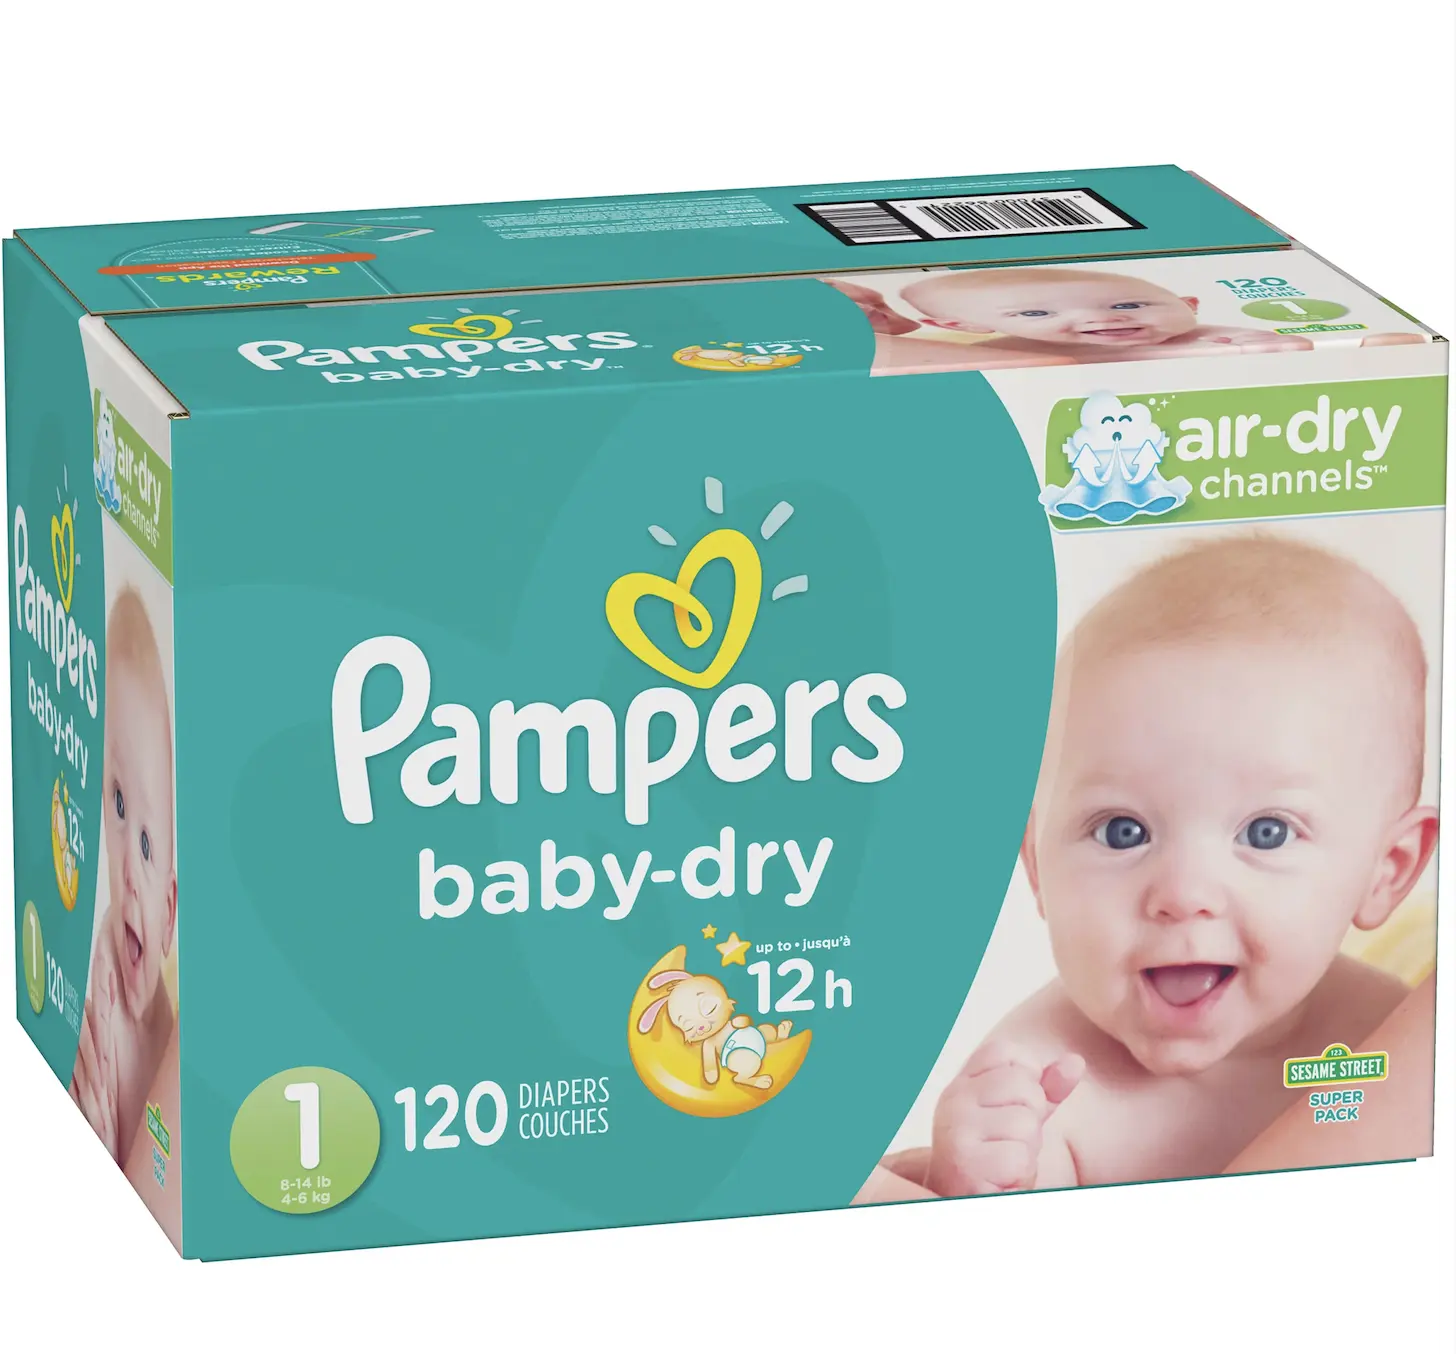 Pampers Baby Dry Disposable Diapers